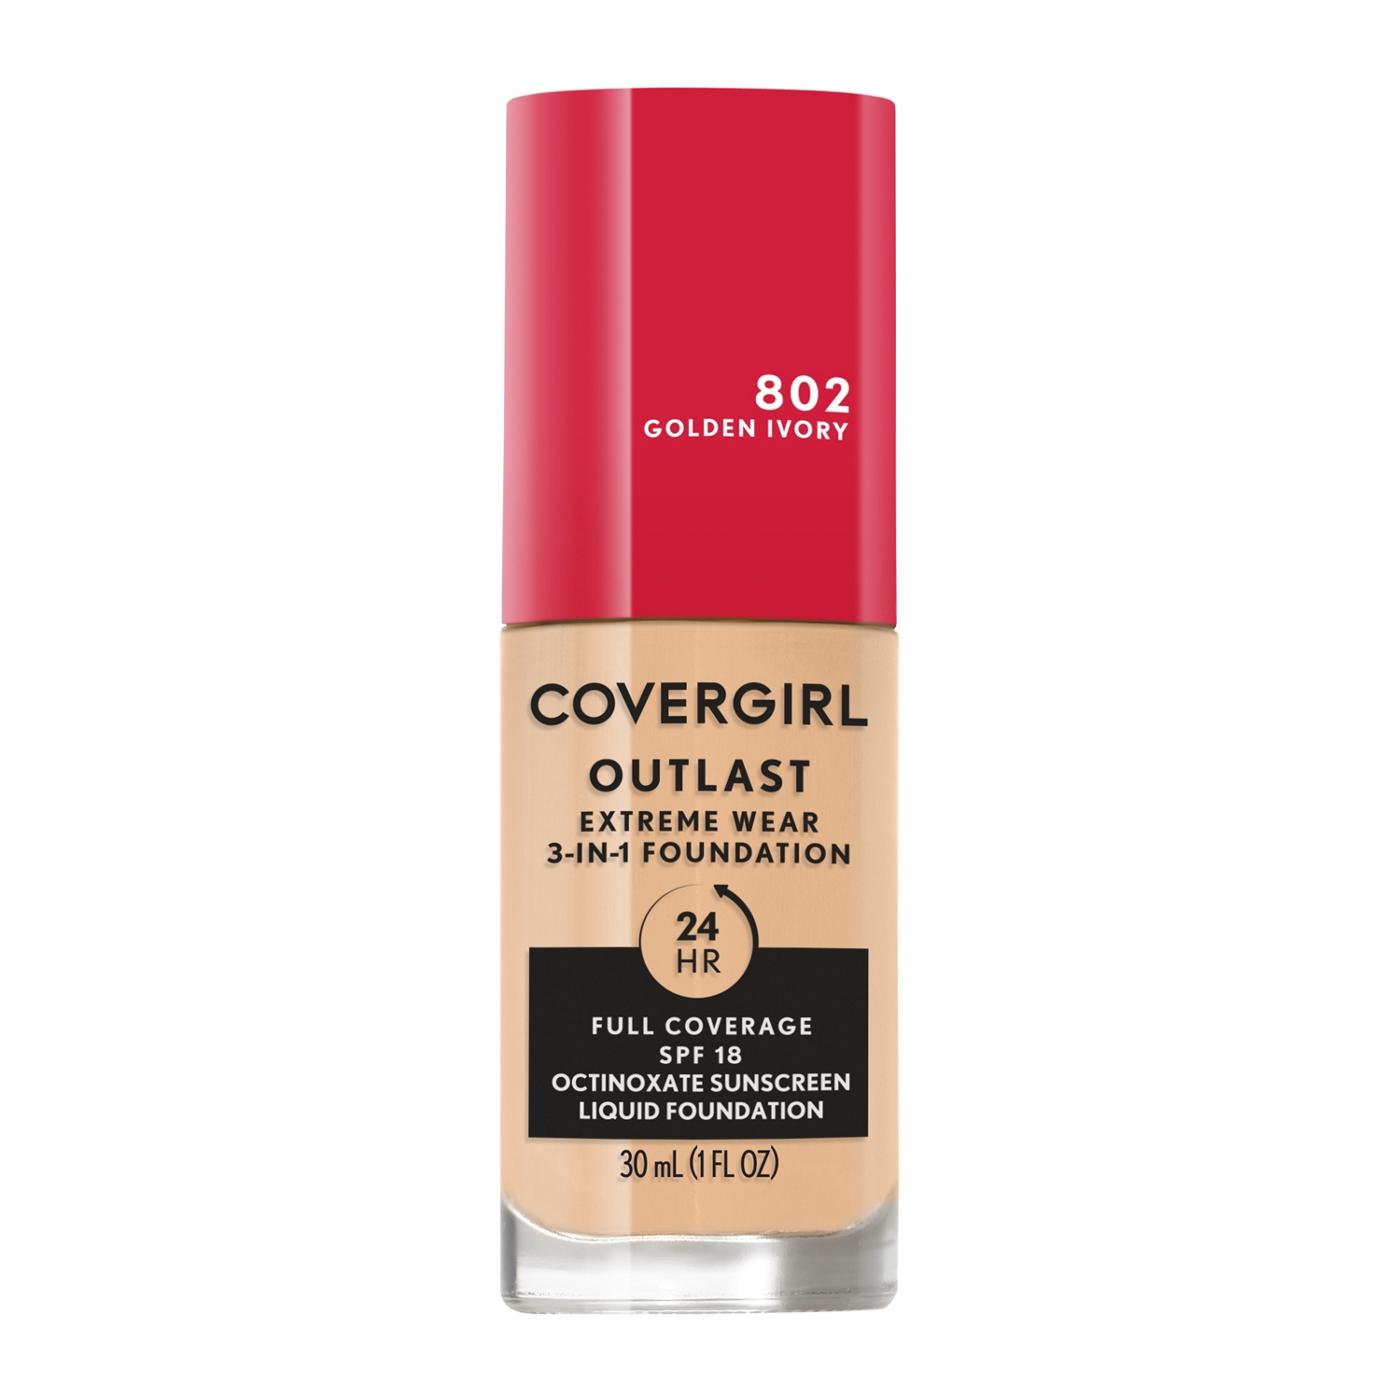 Covergirl Outlast Extreme Wear Liquid Foundation 802 Golden Ivory; image 1 of 11